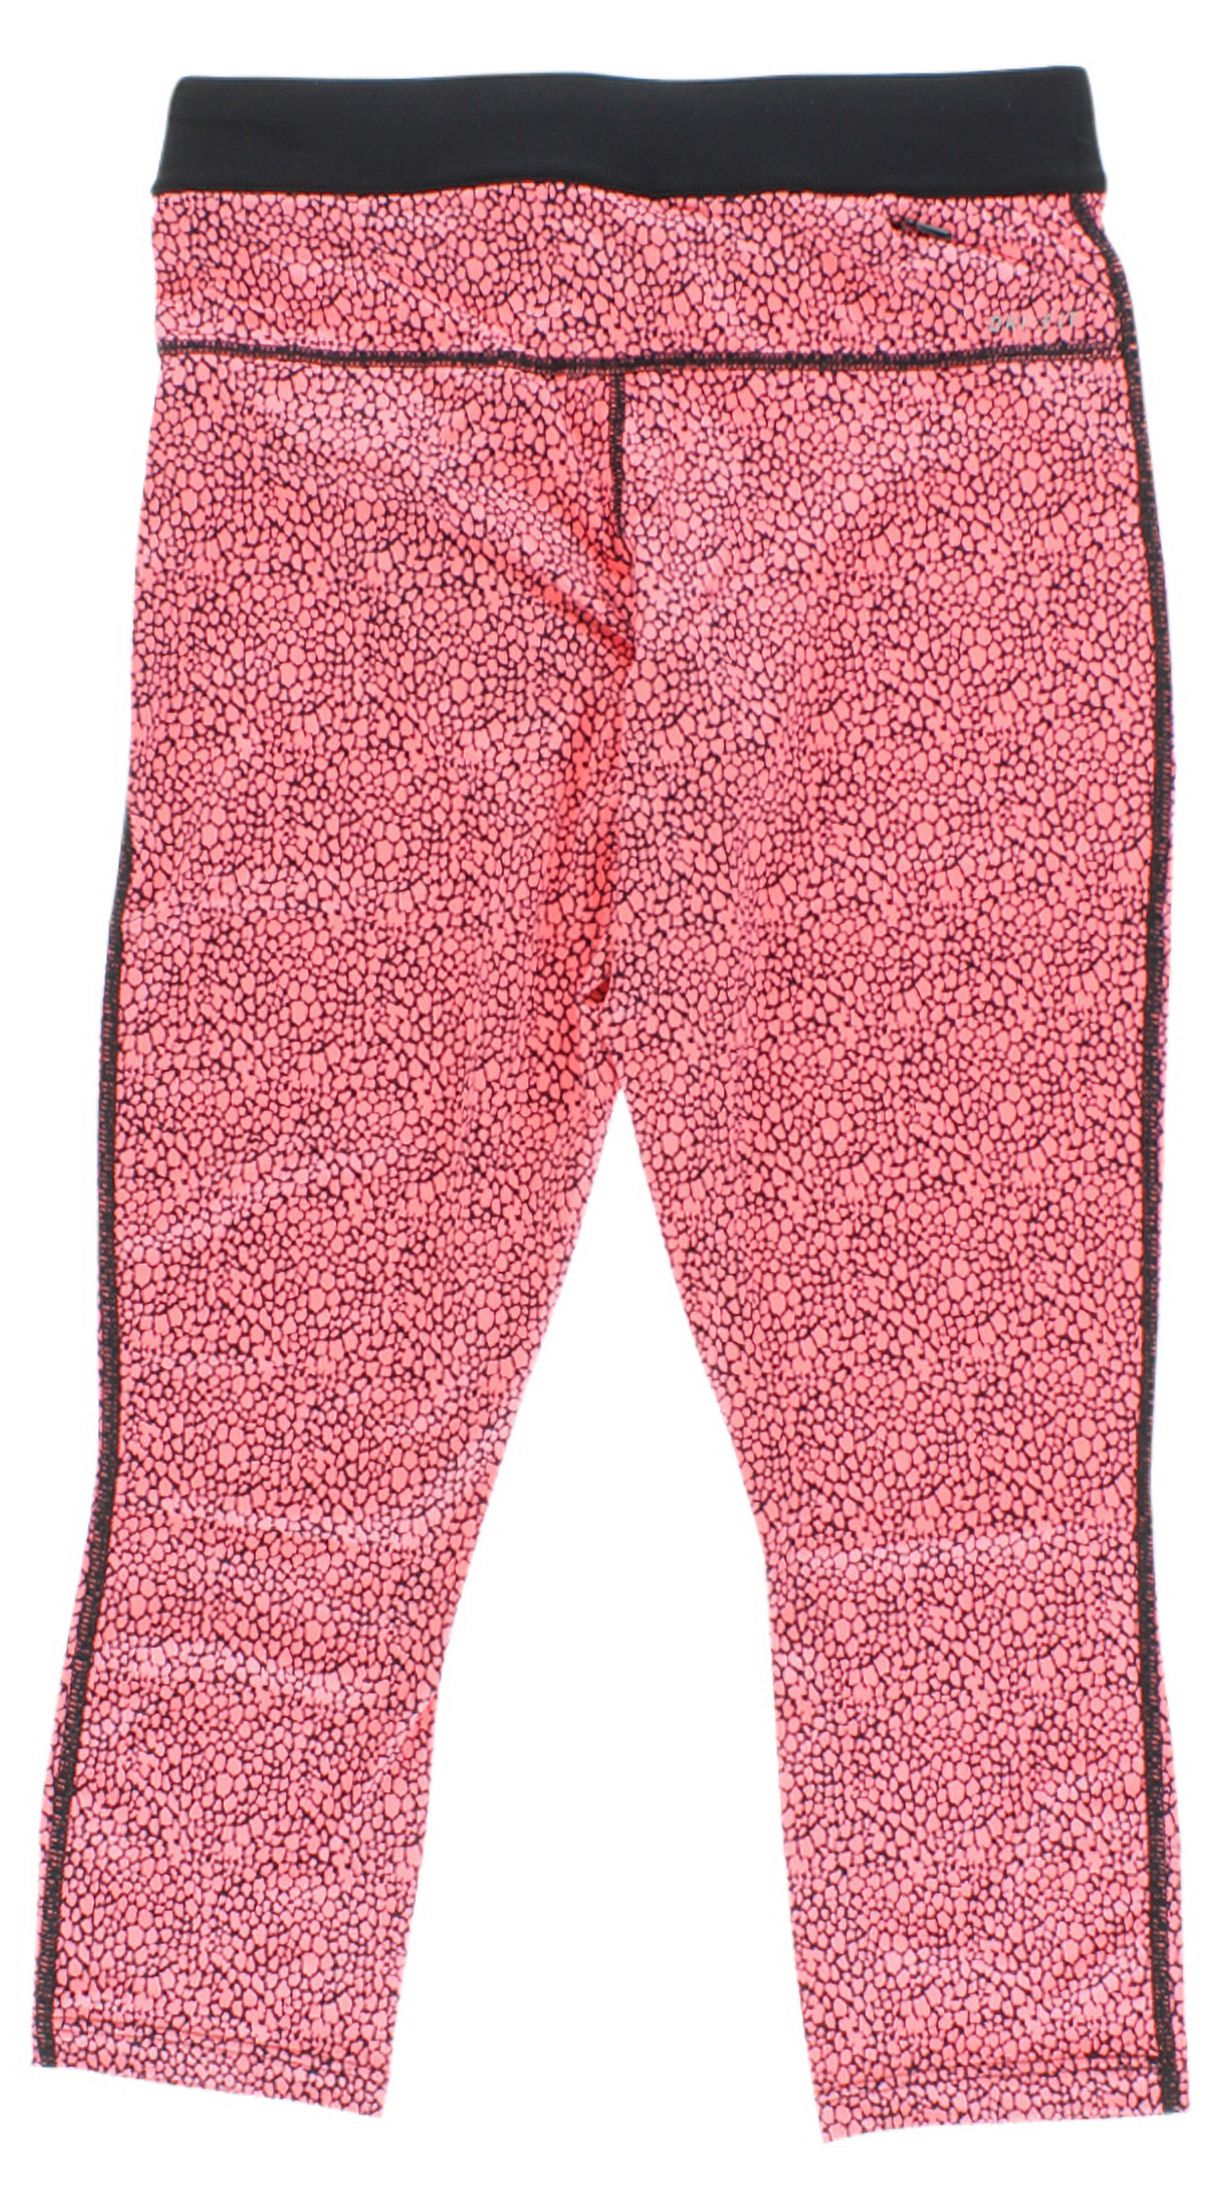 Nike Dri-Fit Aop Relay Crop Running Womens Active Leggings Size Xs, Color: Lava Glow/Black/Reflective Silver - image 2 of 2